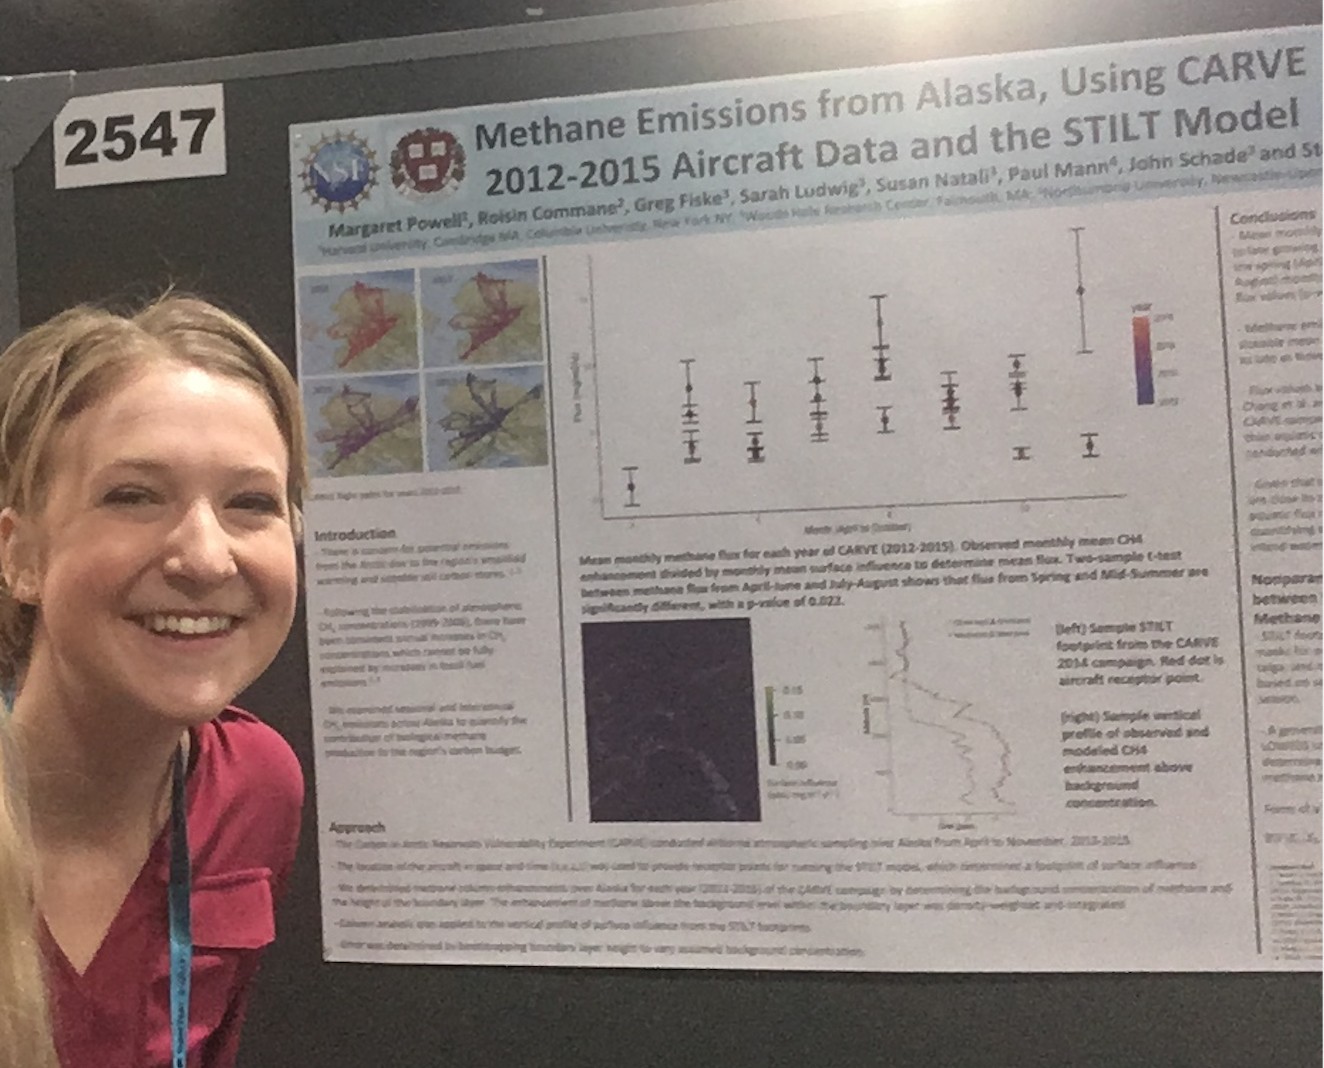 Margaret Powell and her AGU Poster